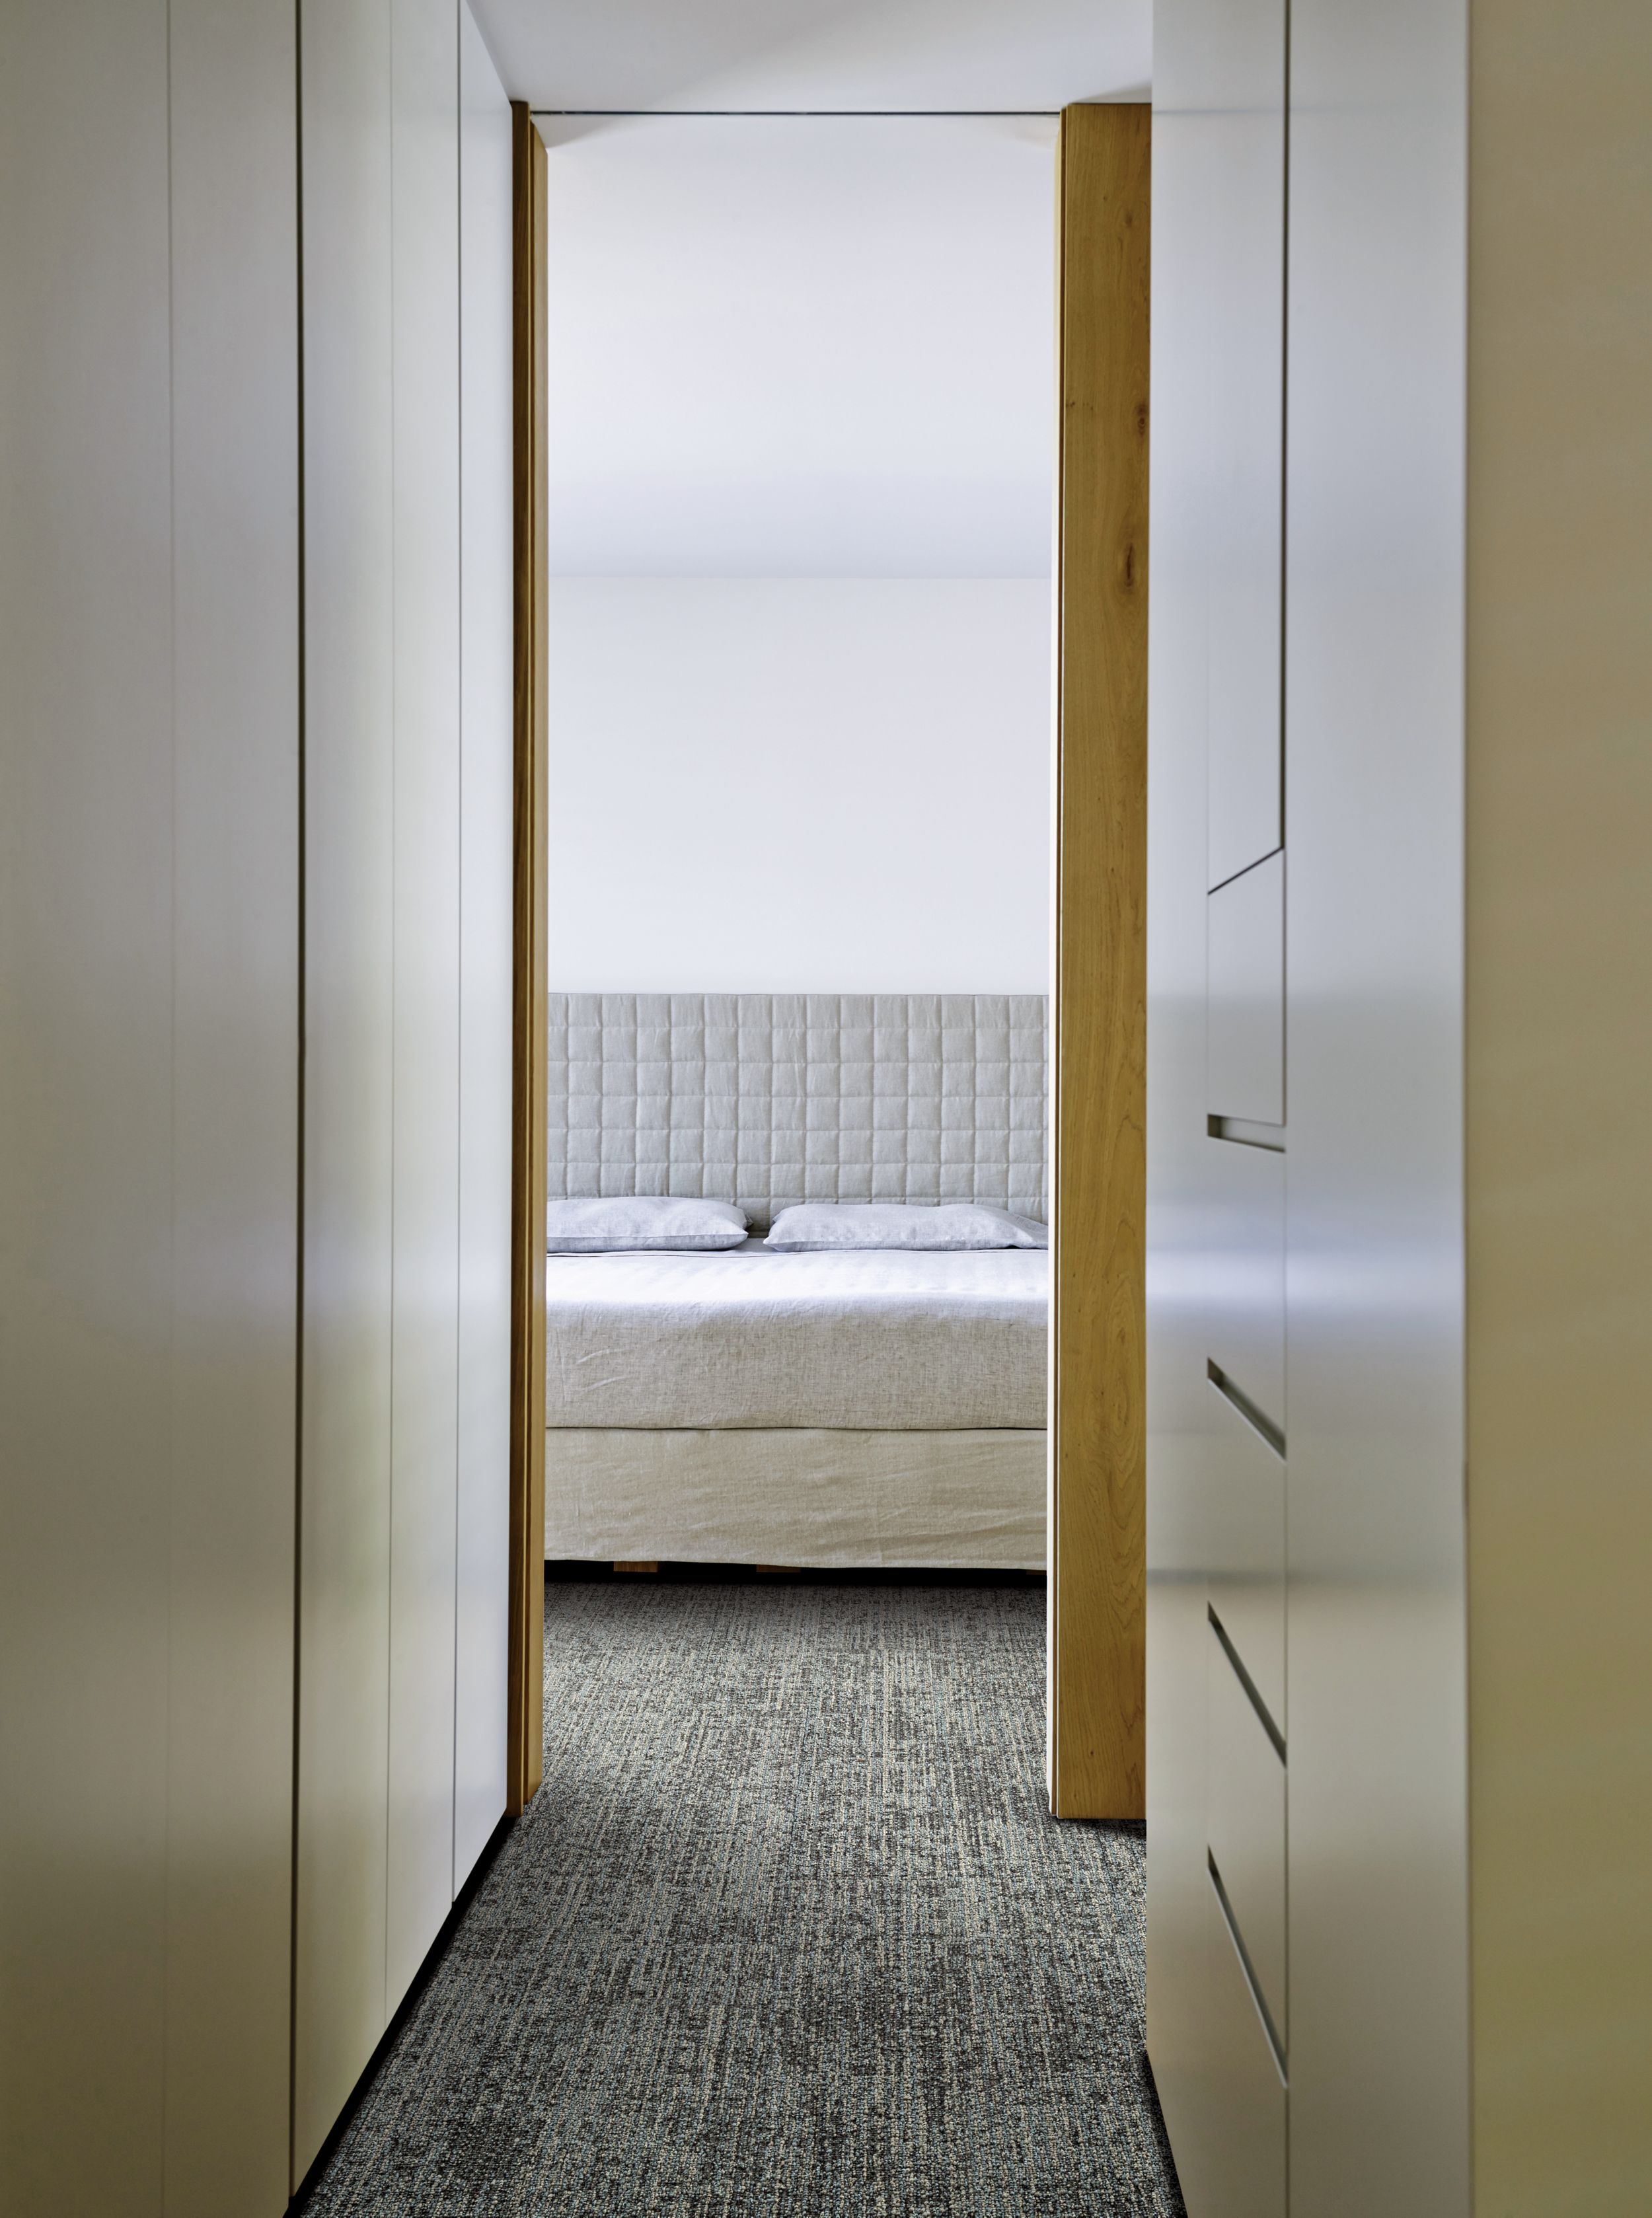 Narrow view off Interface RMS 511 plank carpet tile in hotel guest room numéro d’image 5